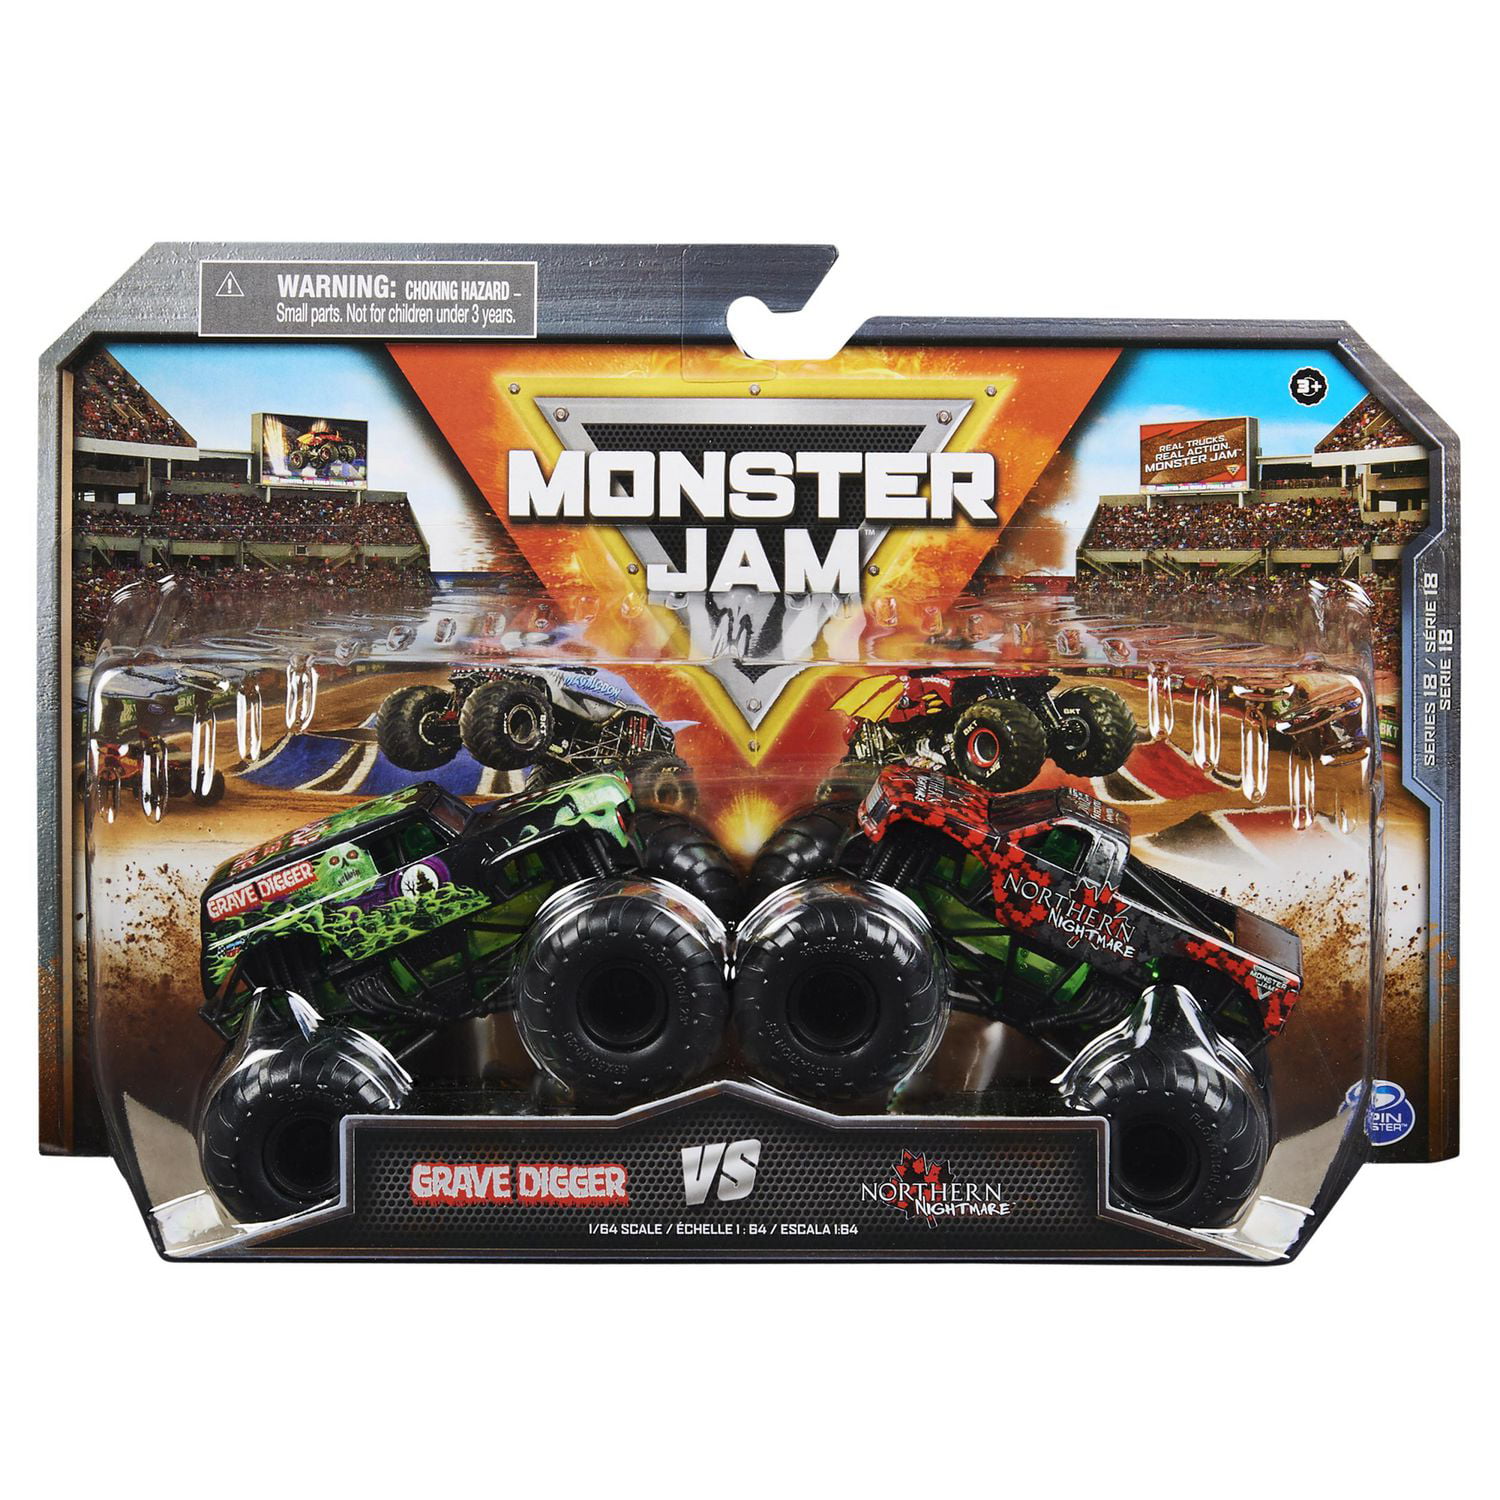 Monster Jam, Grave Digger 40th Anniversary 8-Pack Monster Trucks with Bonus  Accessories, 1:64 Scale, Kids Toys for Boys and Girls 3 and up